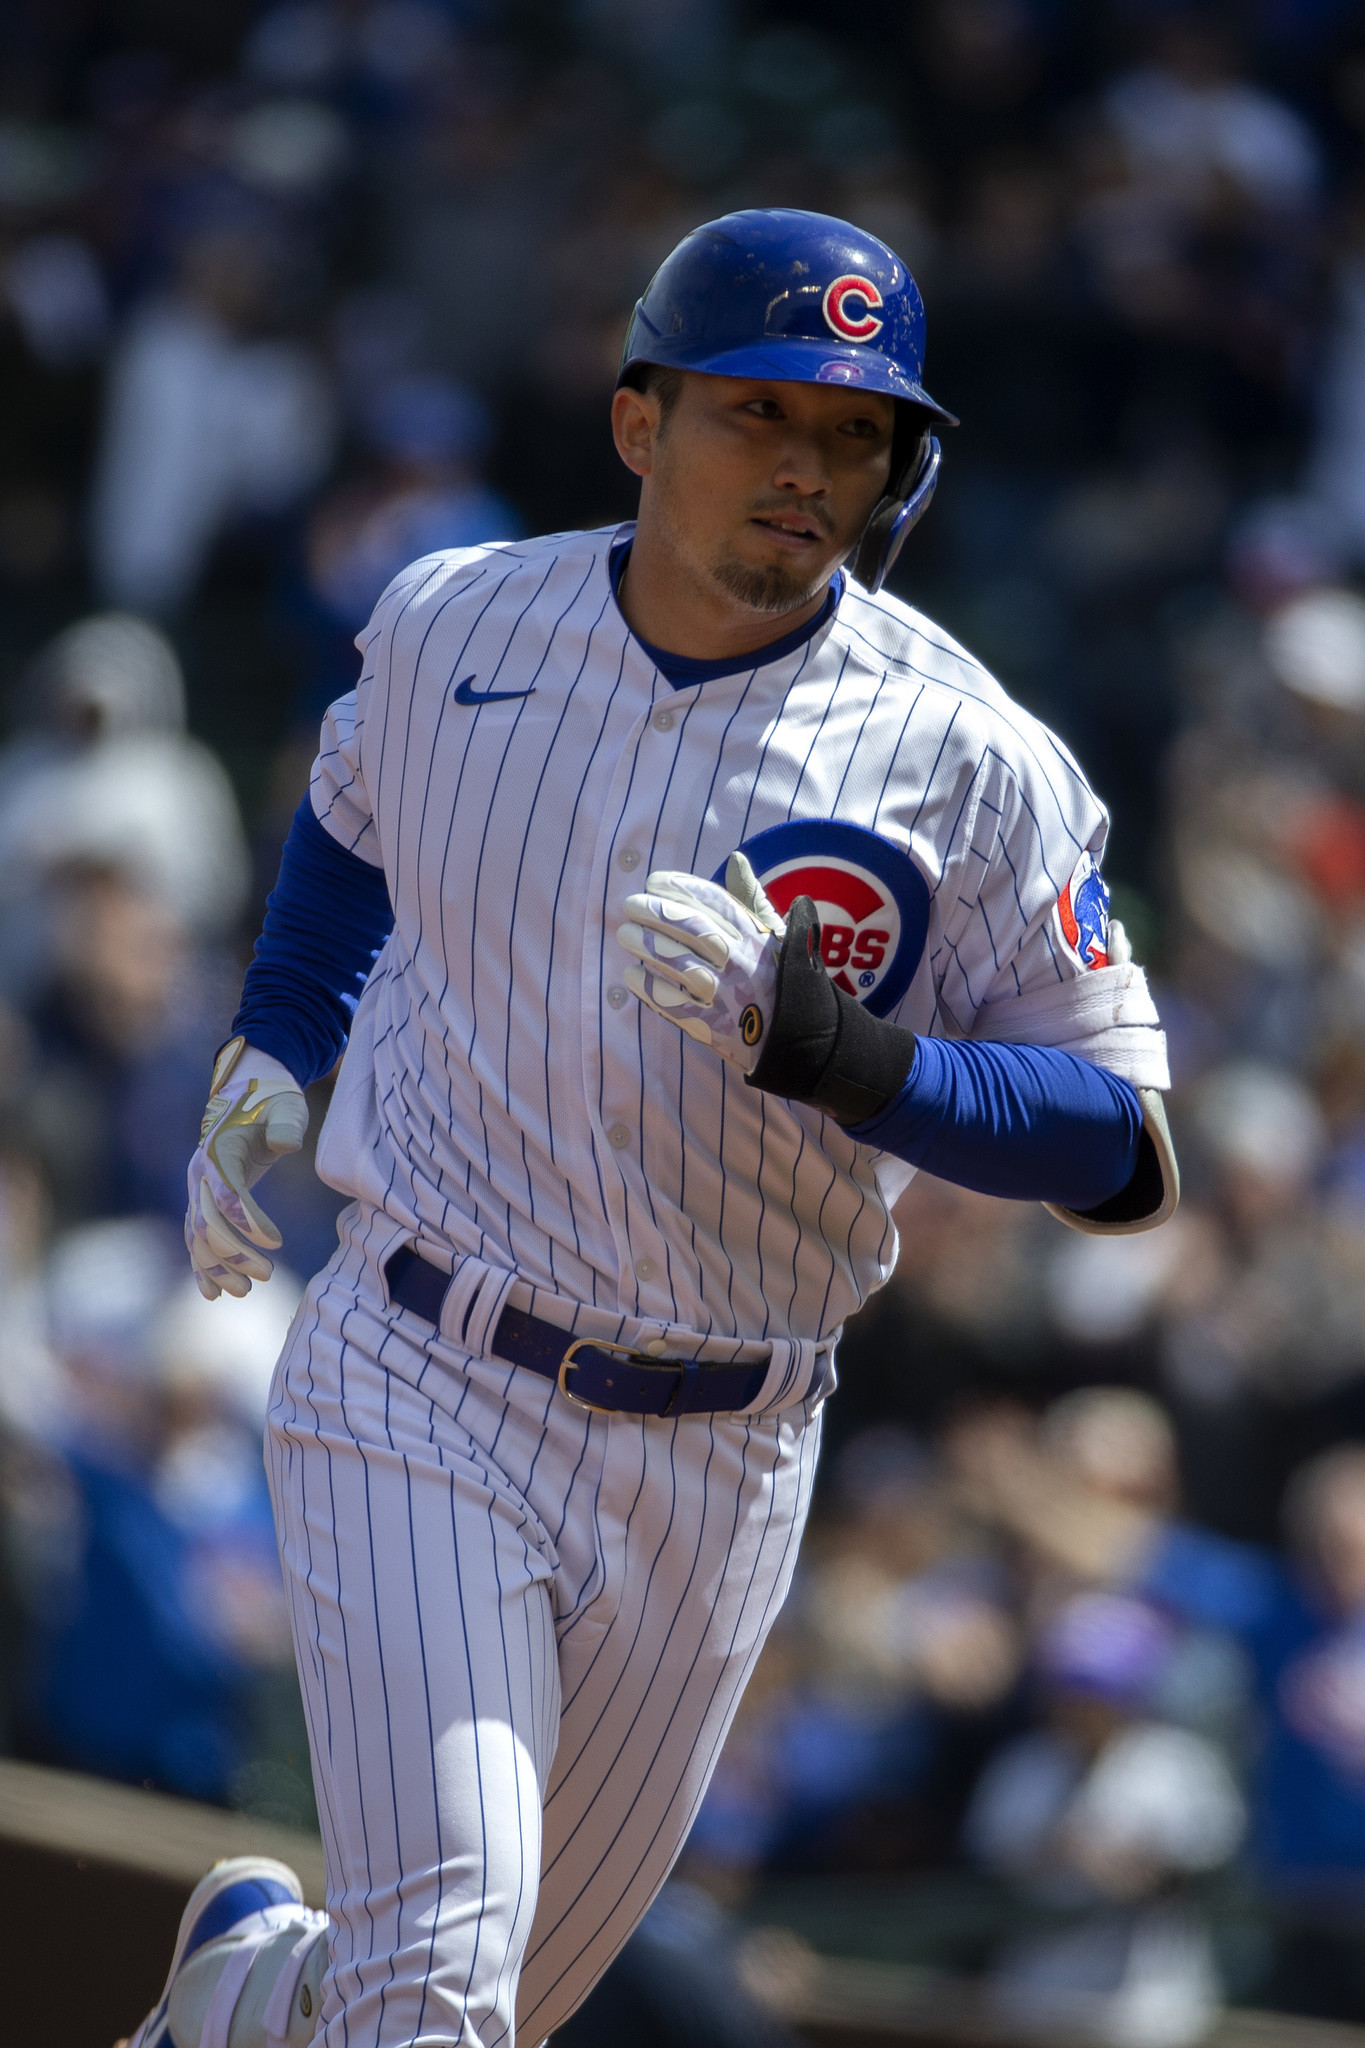 Seiya Suzuki materializing into the player the Cubs thought he was when  they signed him - Marquee Sports Network